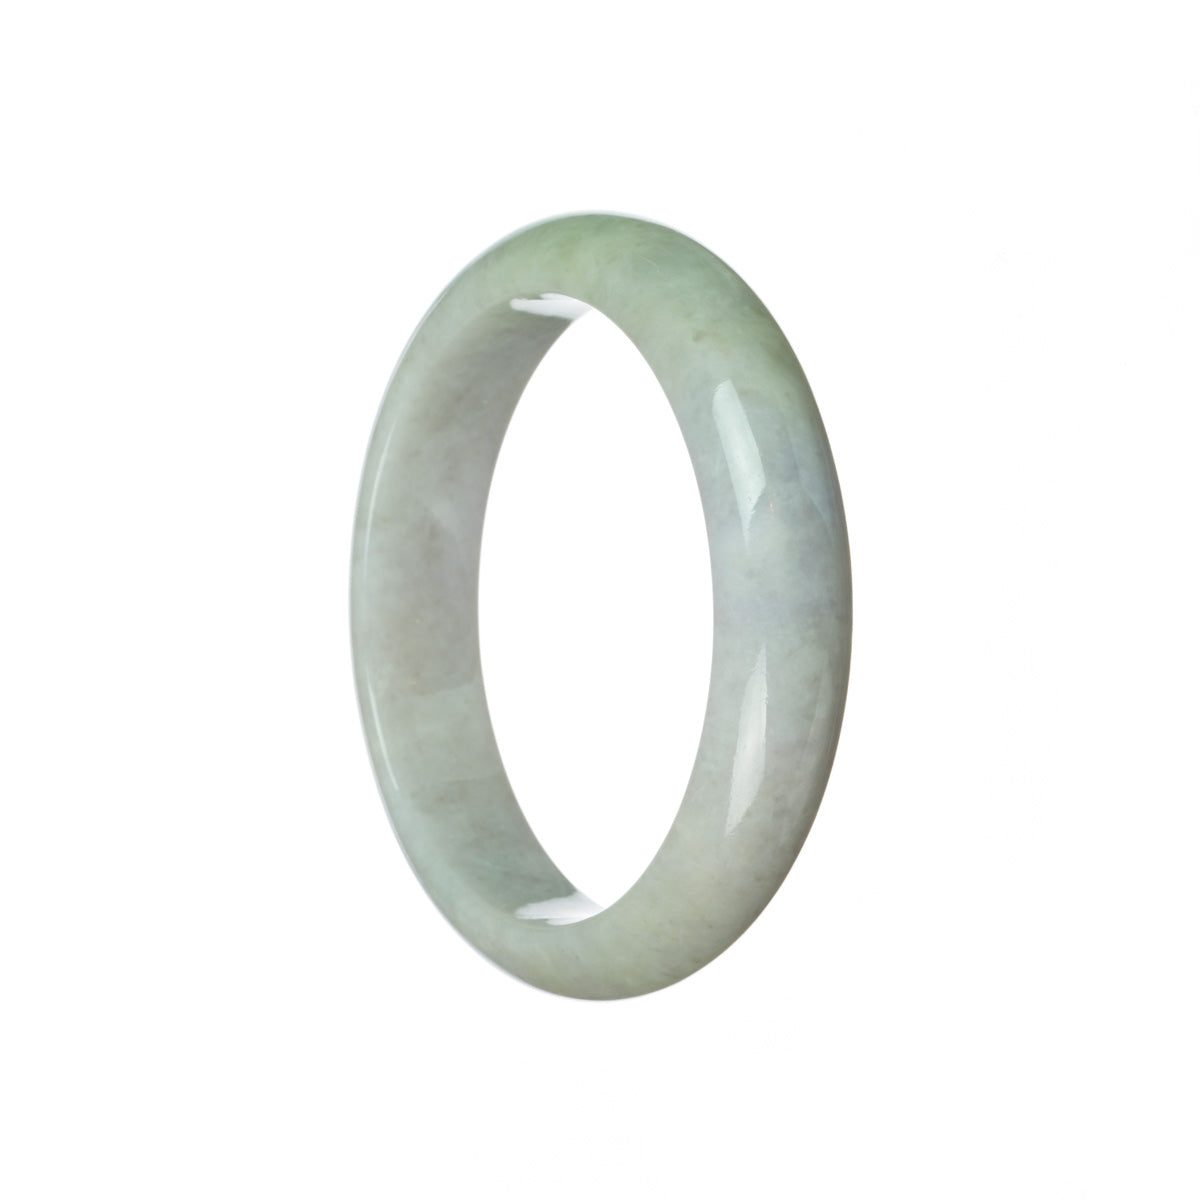 An image of a lavender-colored Burmese Jade Bangle with a half-moon shape. This bangle is certified as Grade A quality and measures 59mm in size. It is offered by MAYS GEMS.